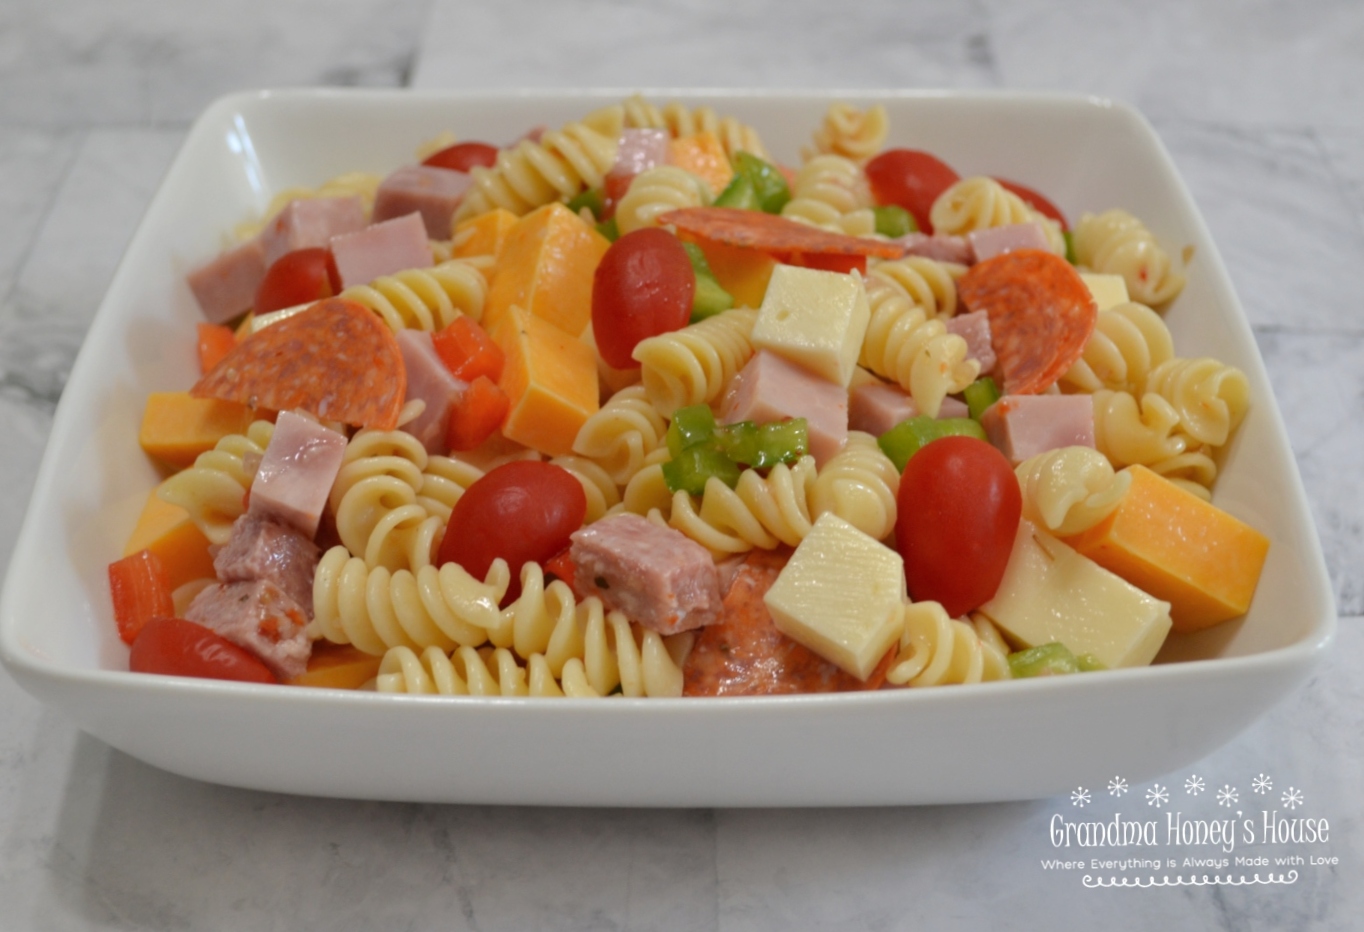 This Protein Packed Pasta Salad is loaded with veggies, meats, and cheeses. Colorful, delicious, and perfect to transport to any summer event.